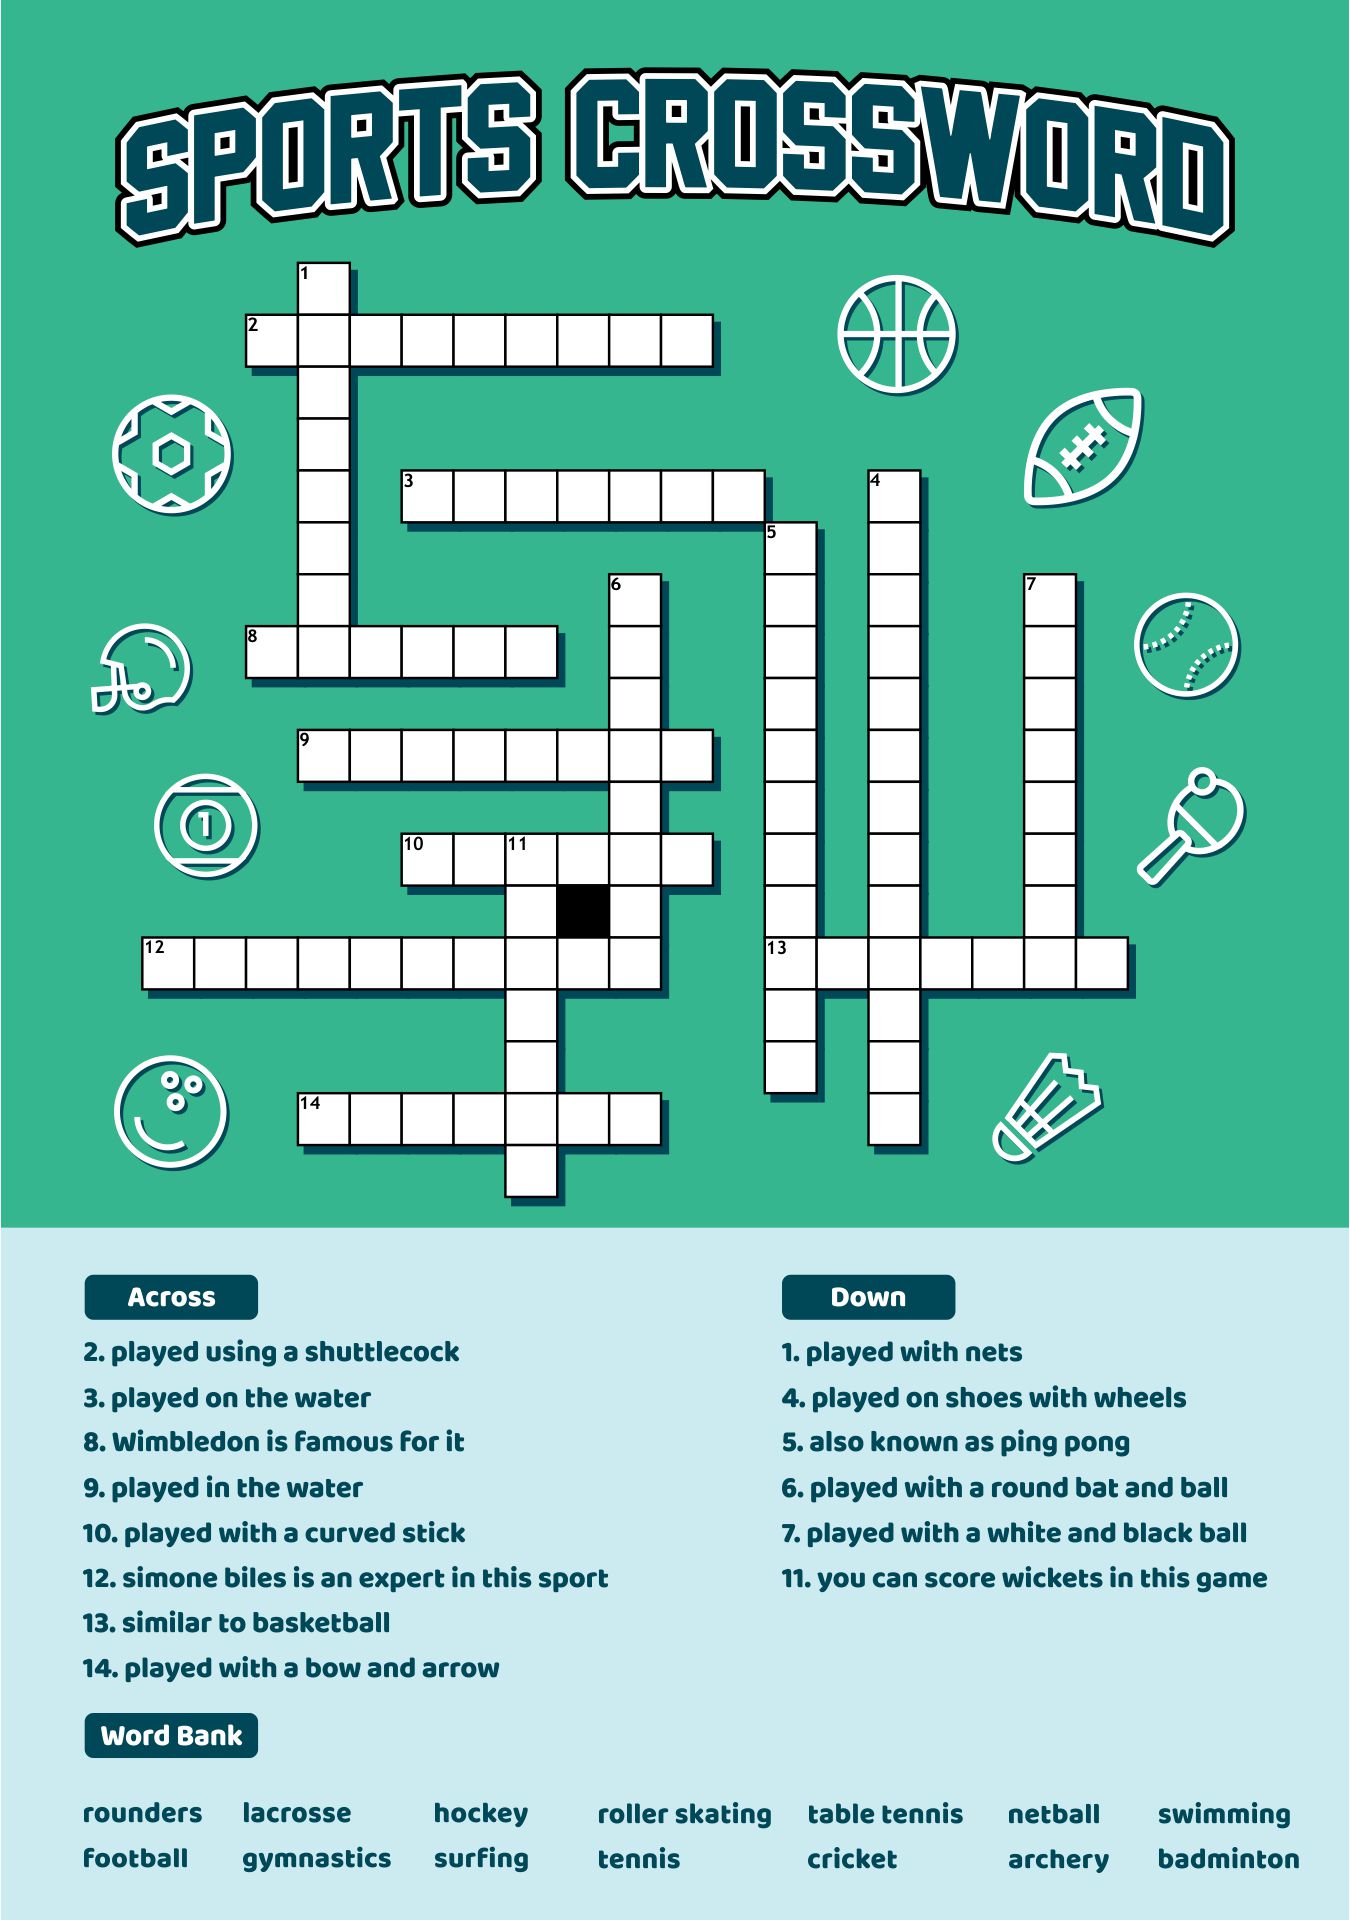 Many a download crossword stock rom download for samsung a7 lite